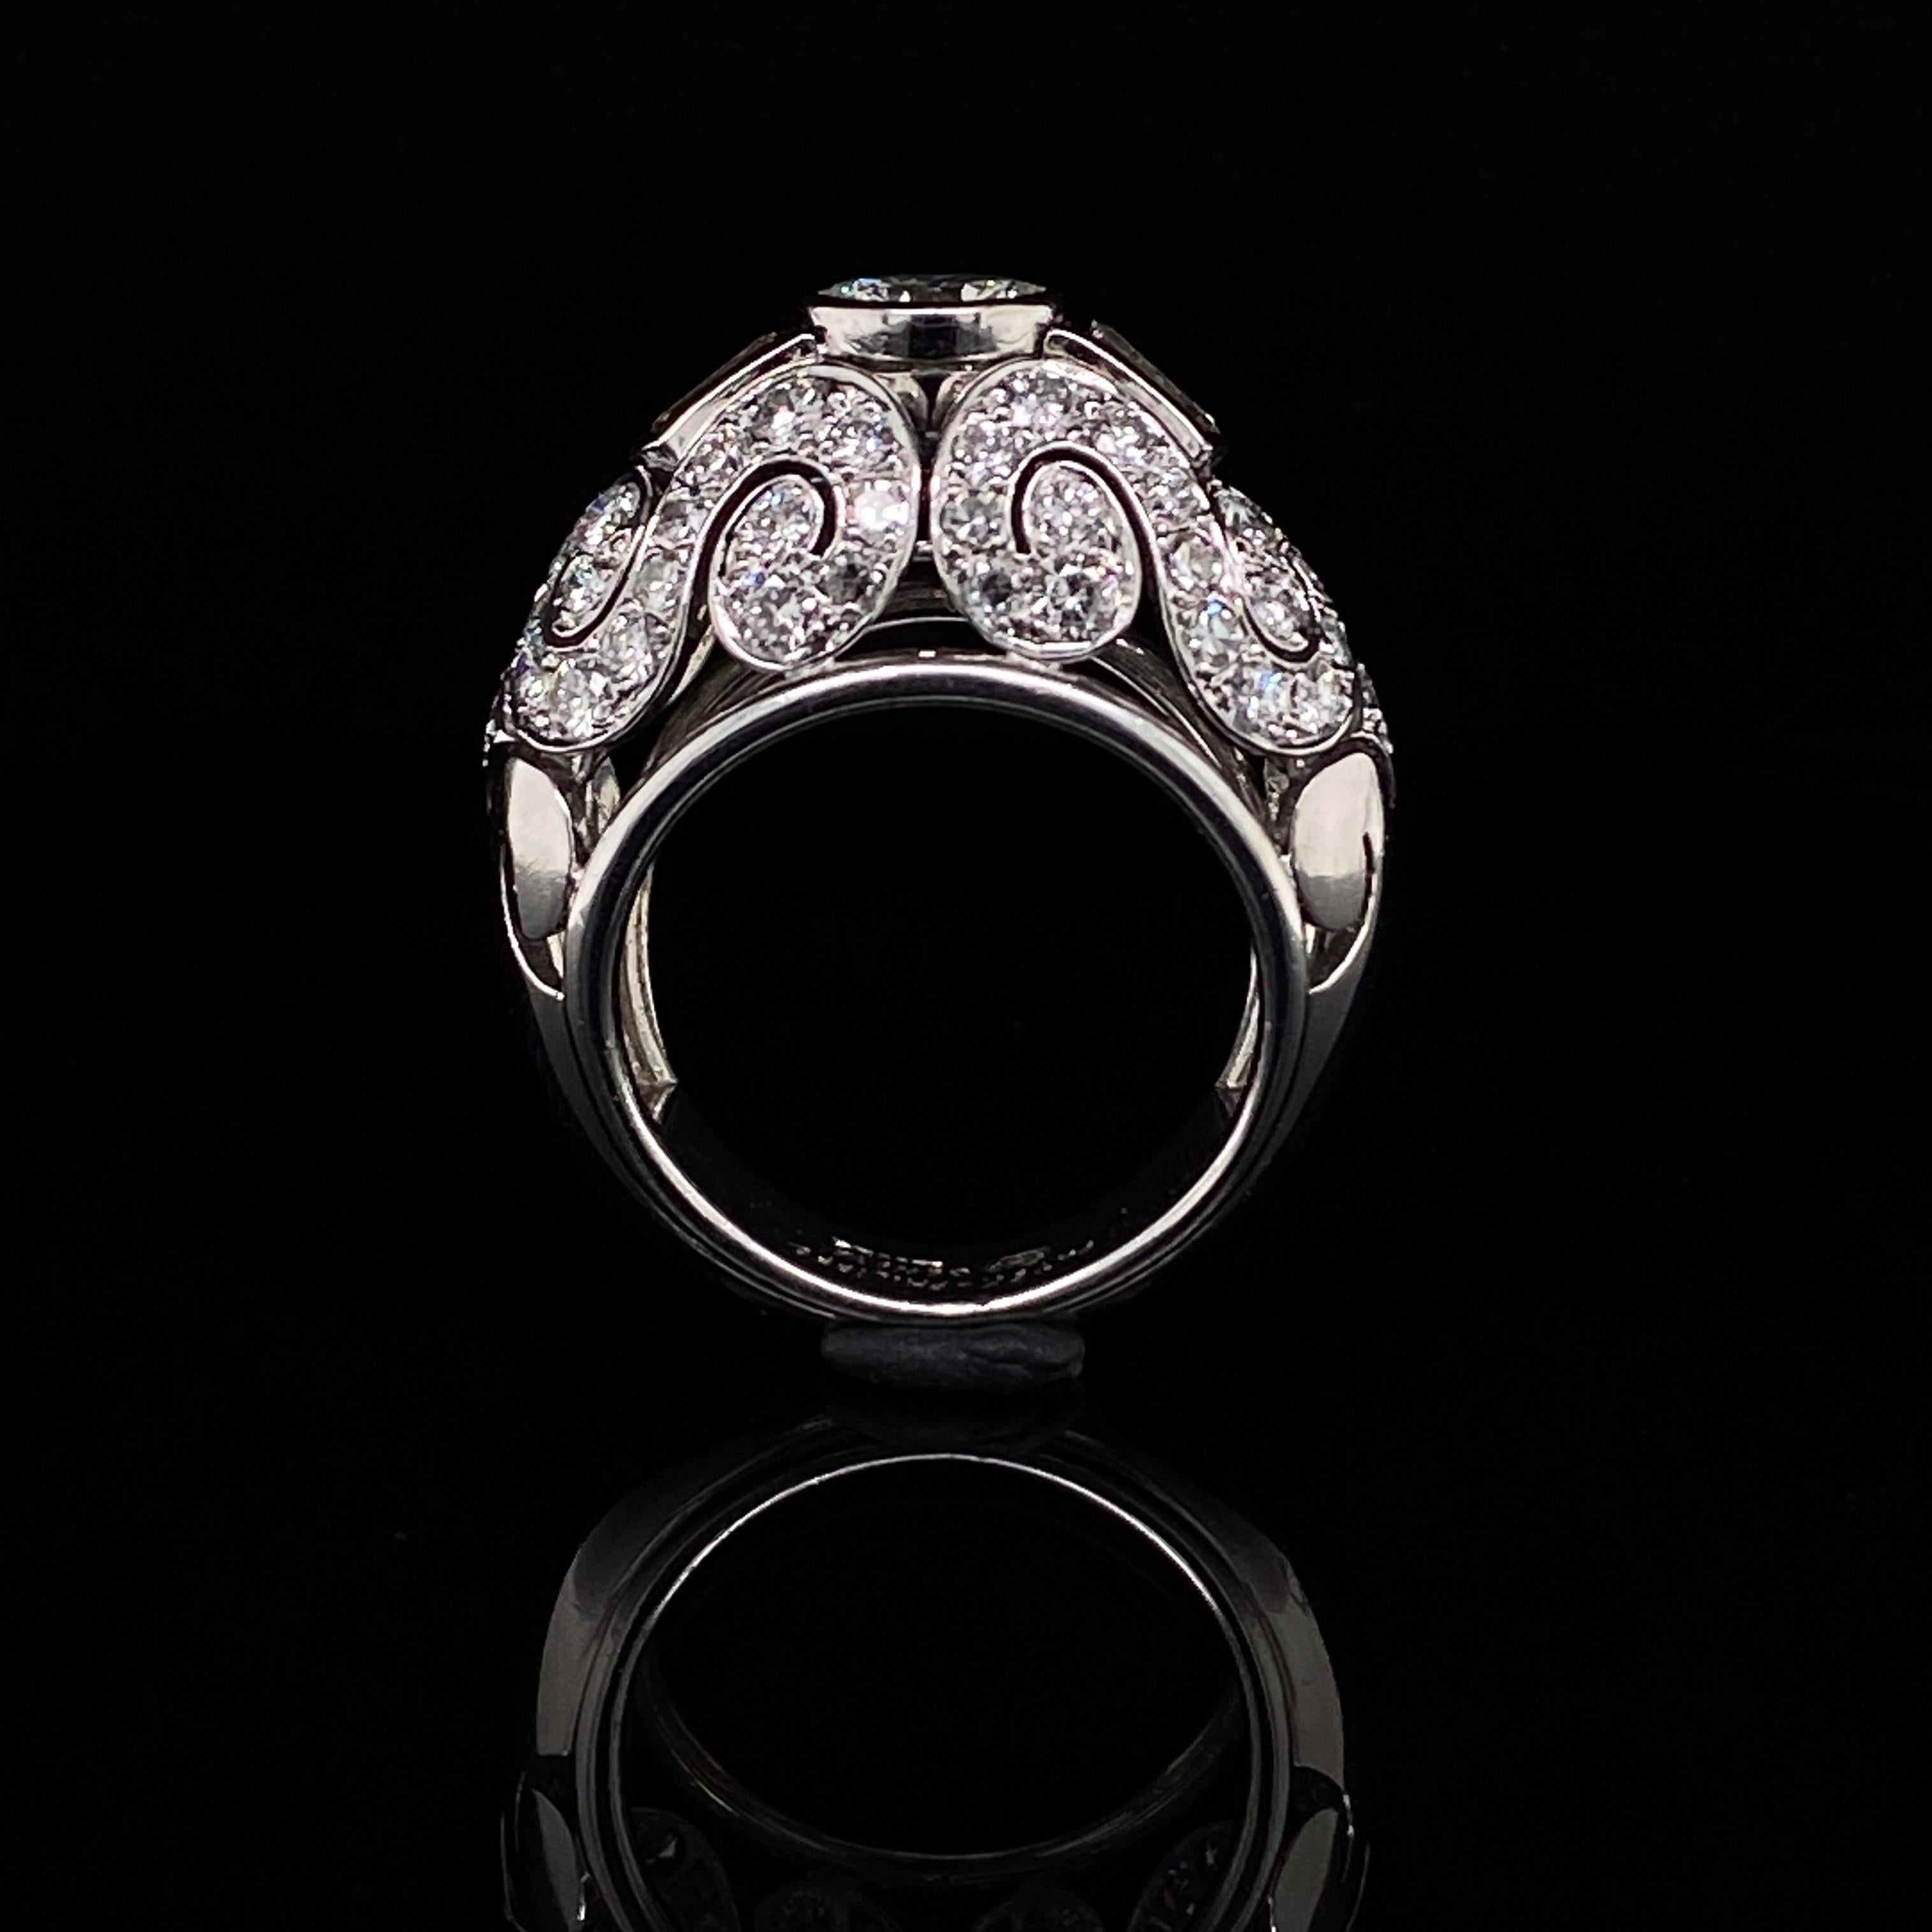 Patek Philippe Platinum Diamond Cocktail Ring In Good Condition For Sale In London, GB